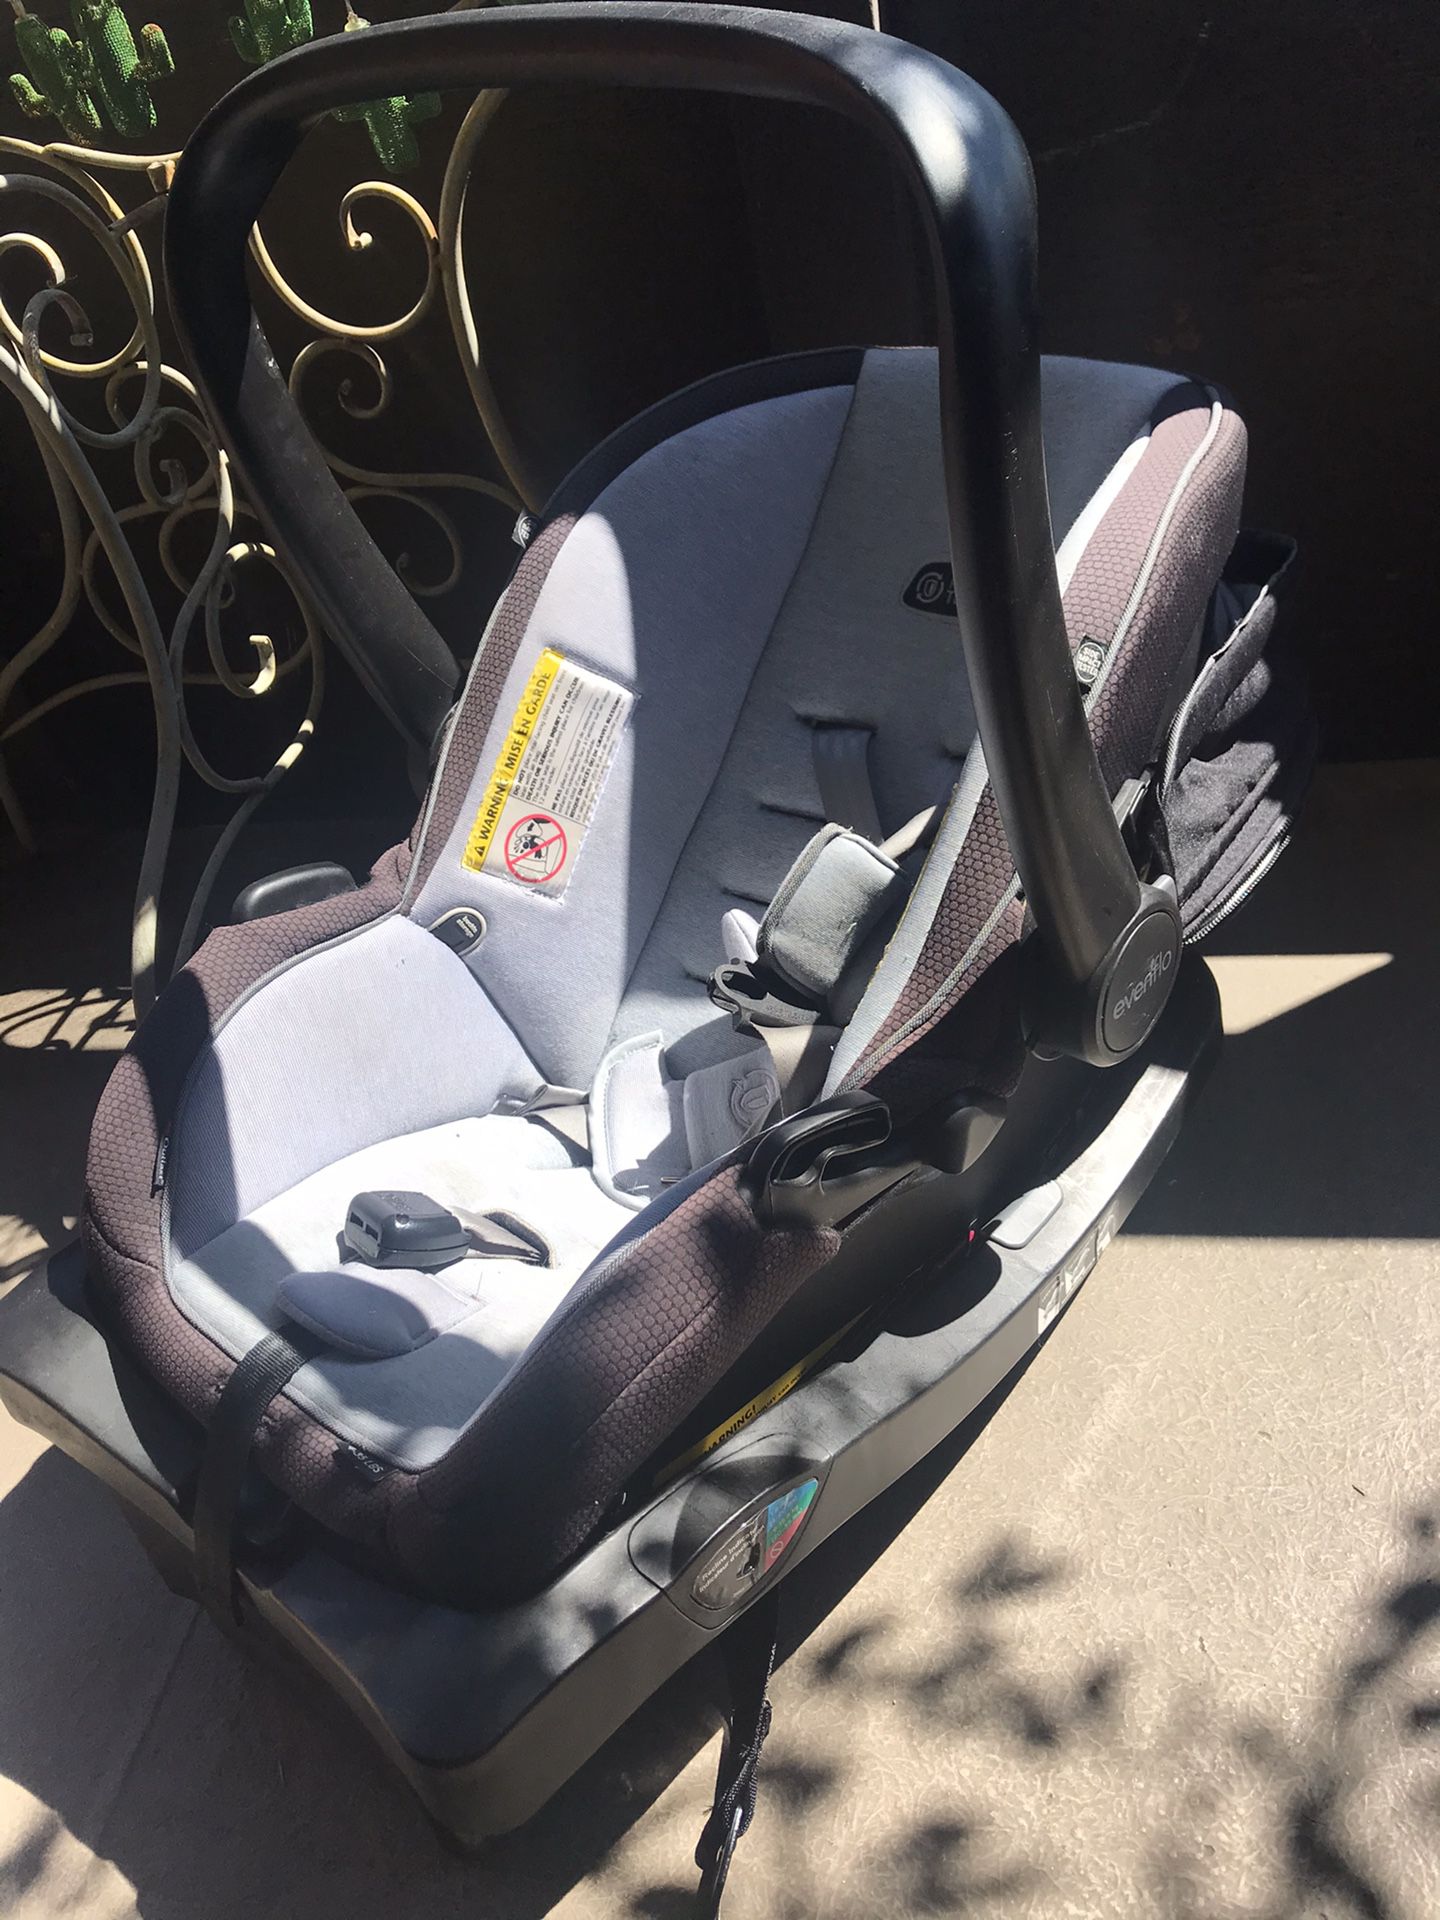 Evenflo infant car seat + Two (2) Bases